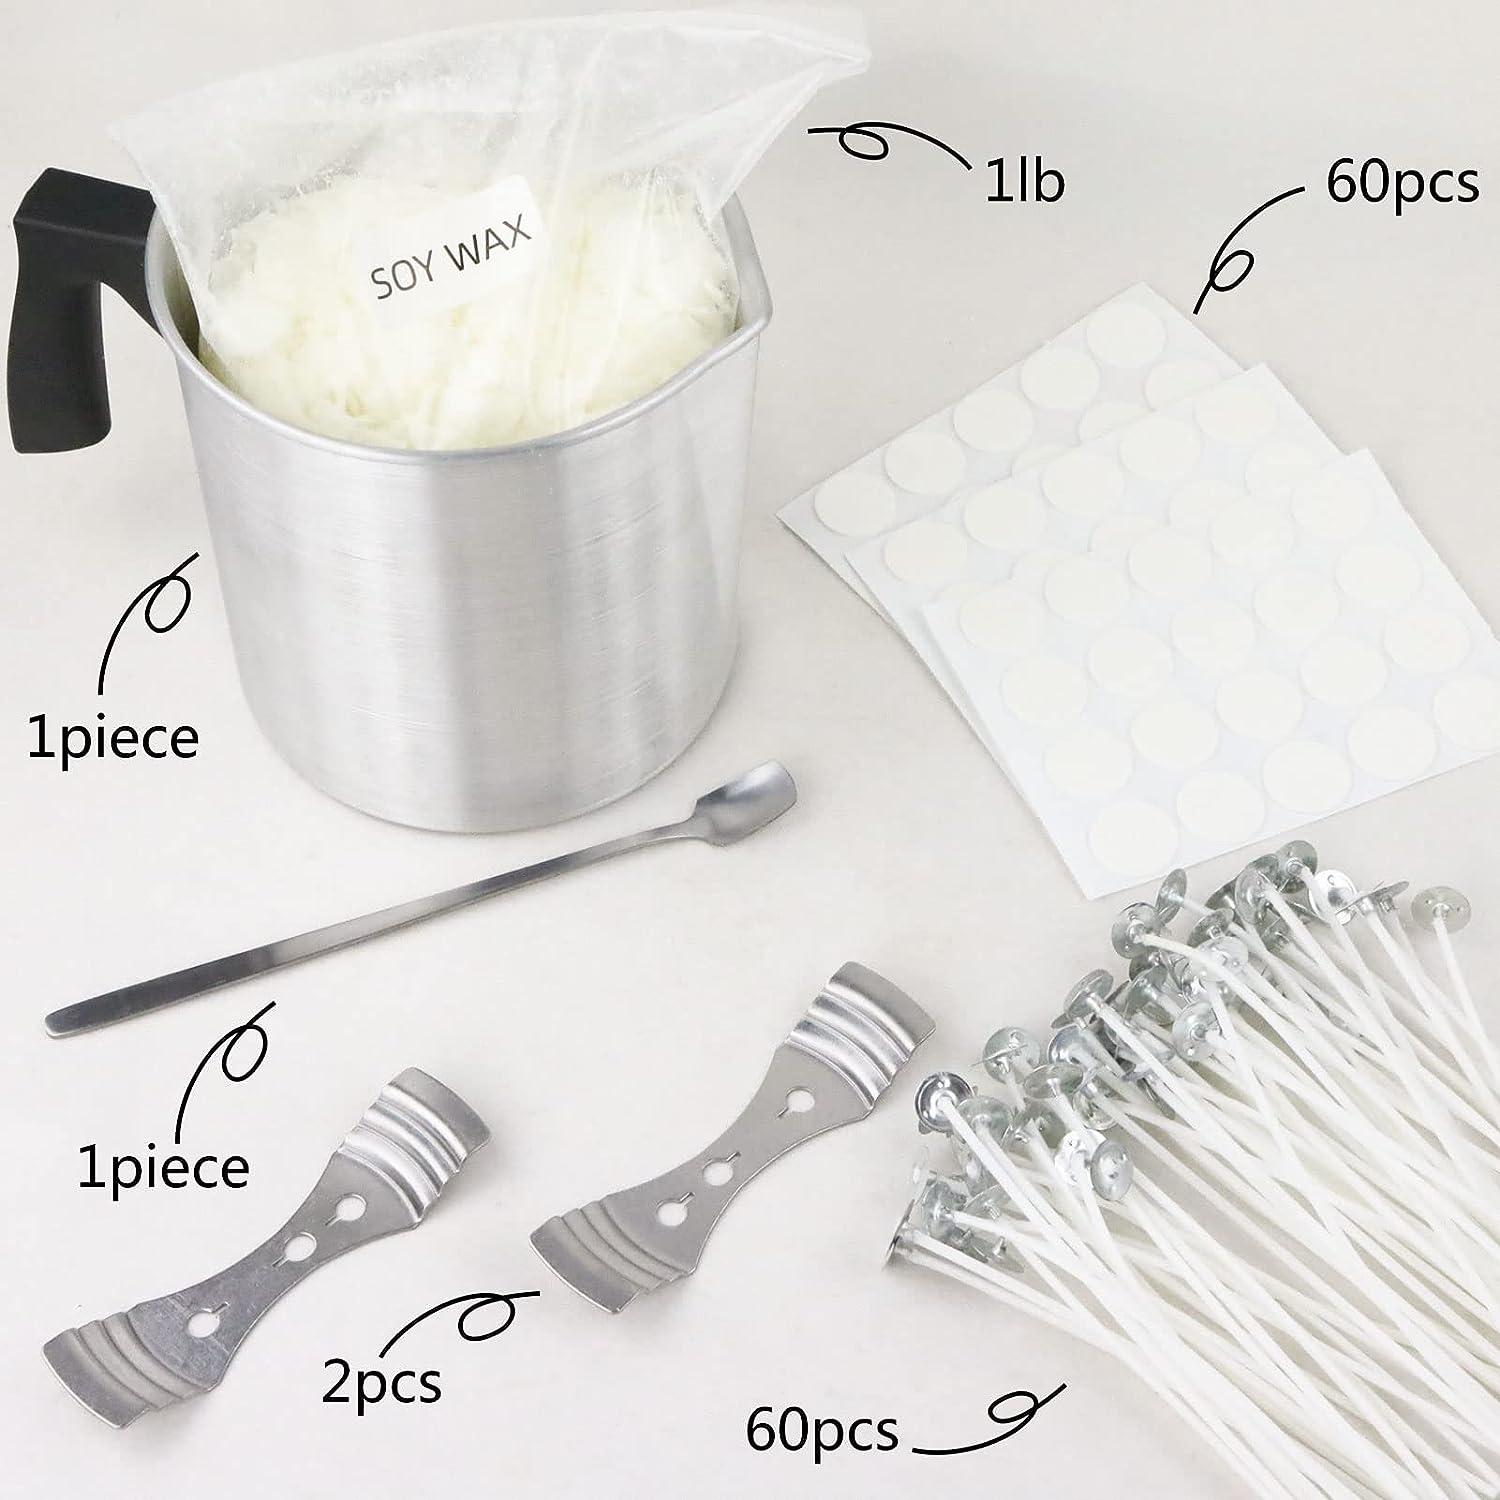 DIY Candle Making Kit,Candle Wick Sticker for Candle Craft Making 